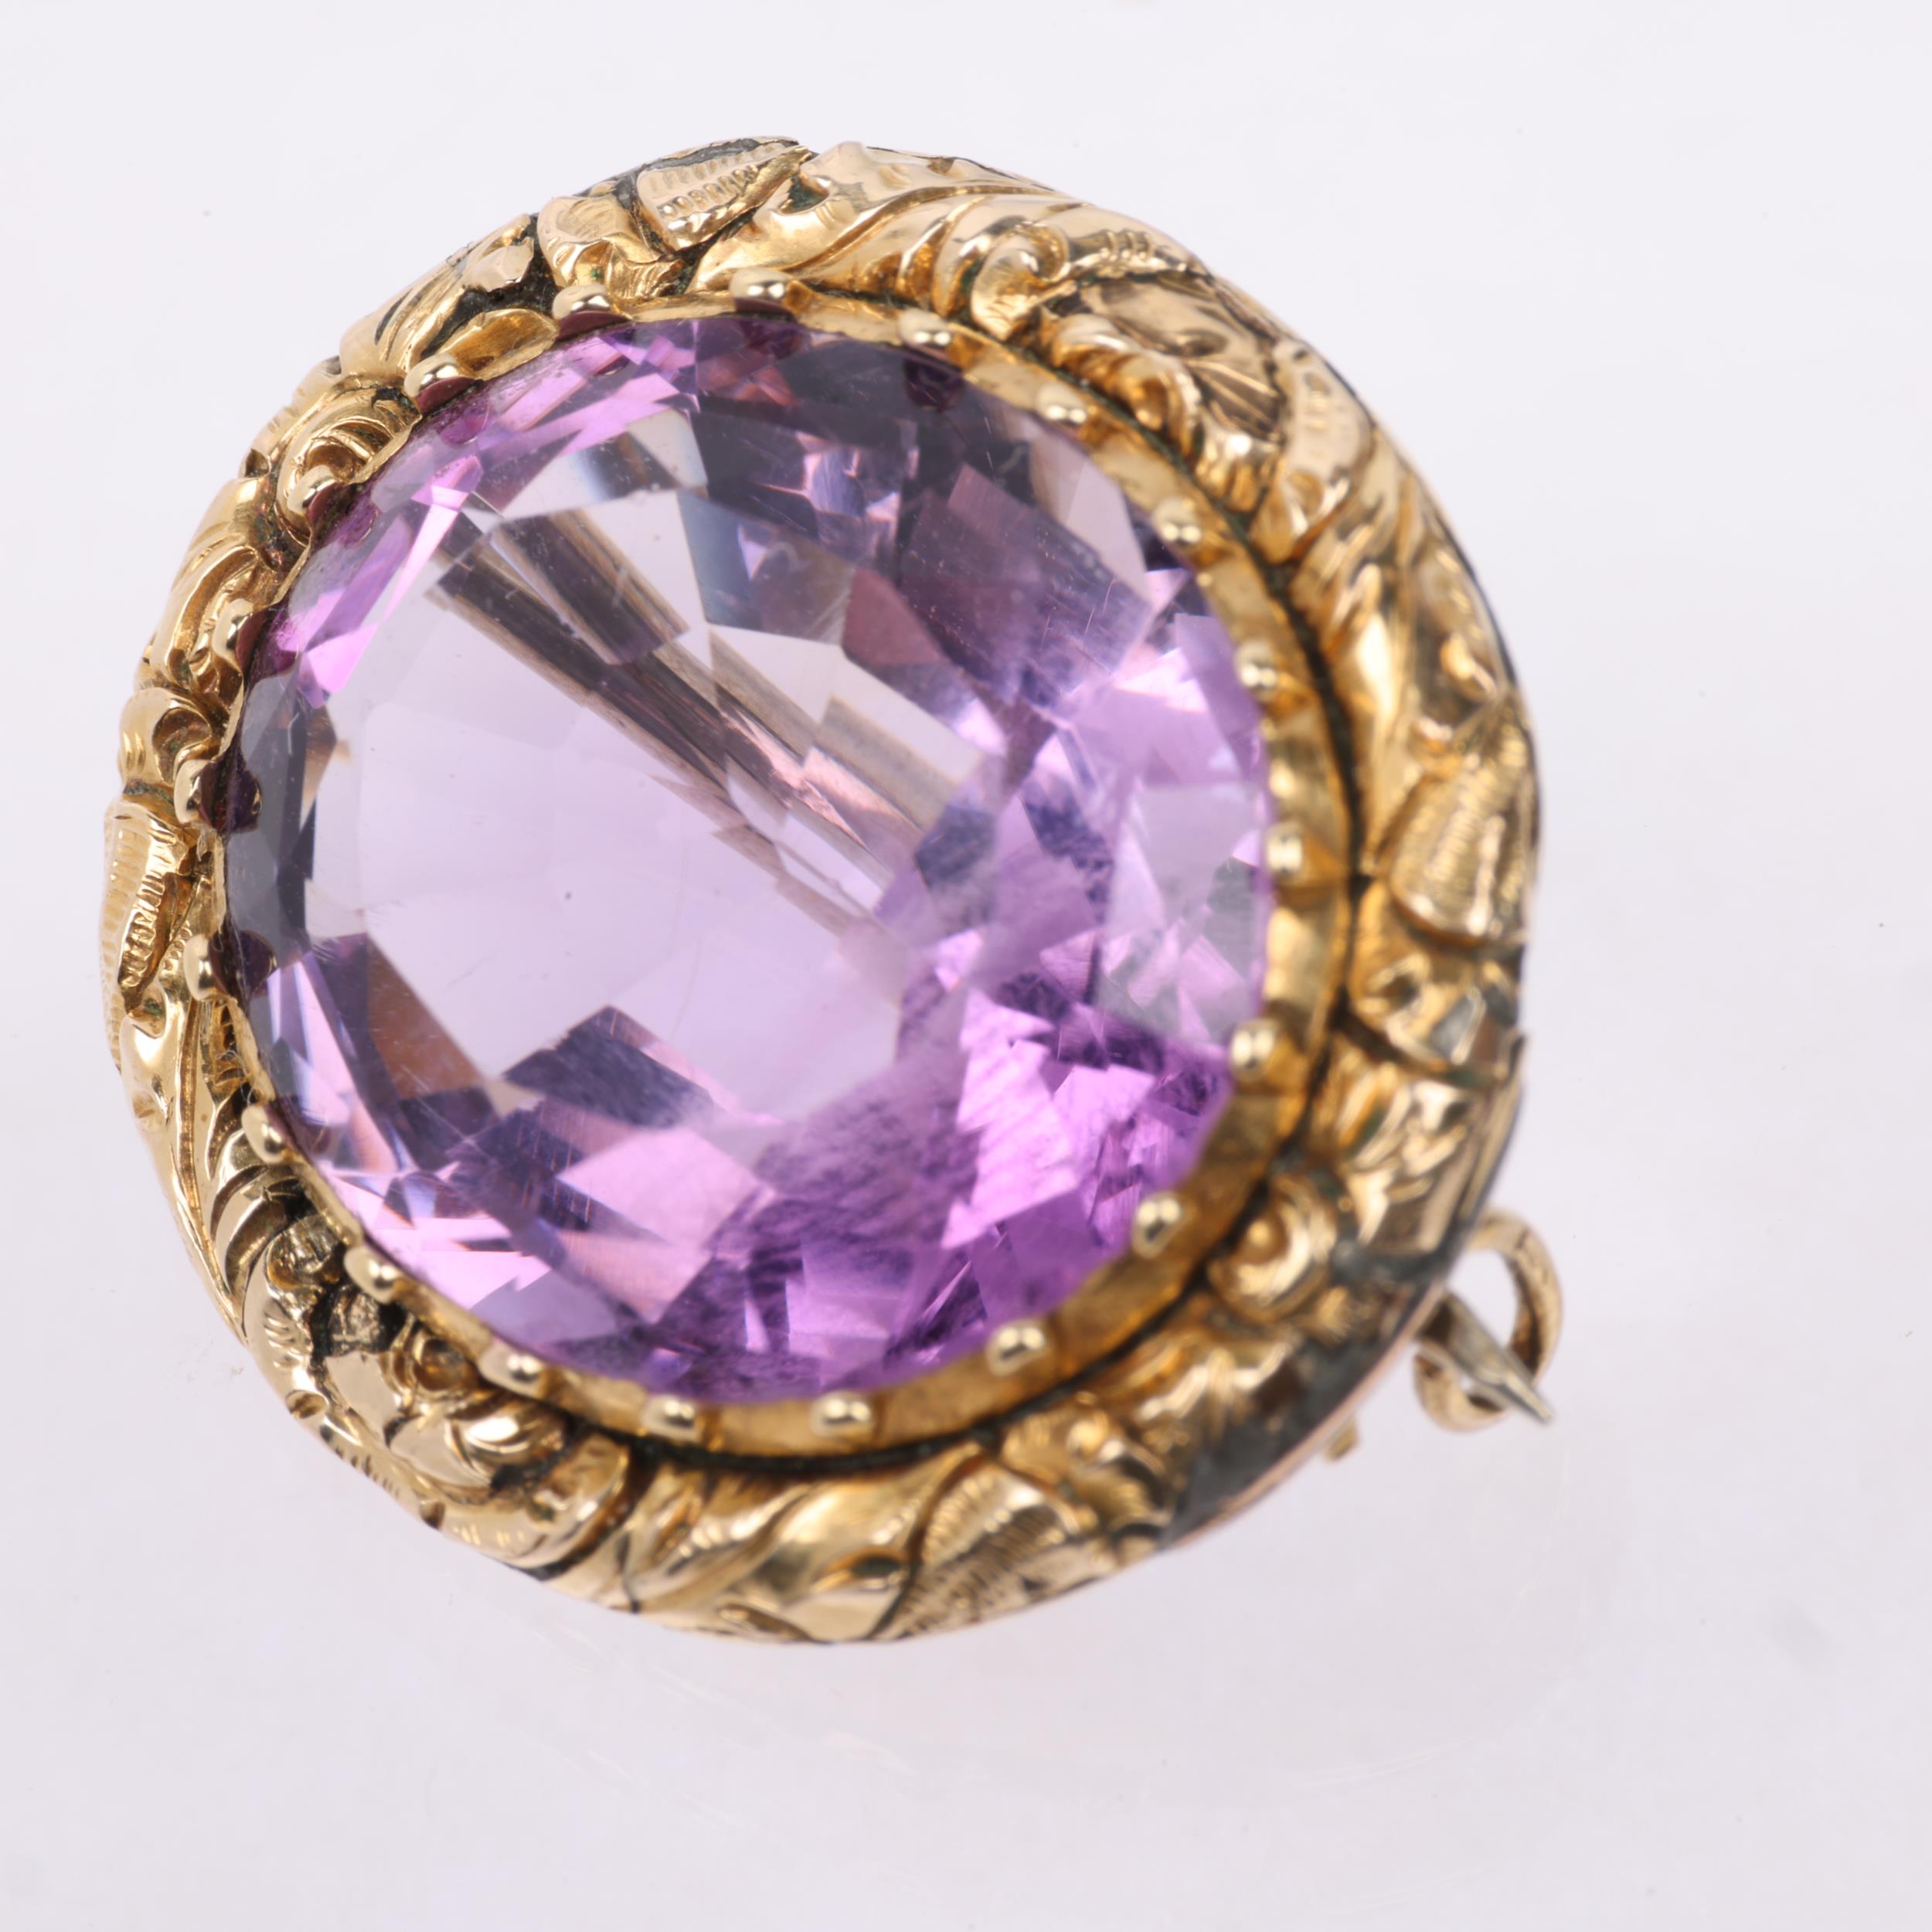 A Georgian amethyst brooch, circa 1820, cut-down collet set with 16ct oval mixed-cut amethyst, - Image 3 of 4